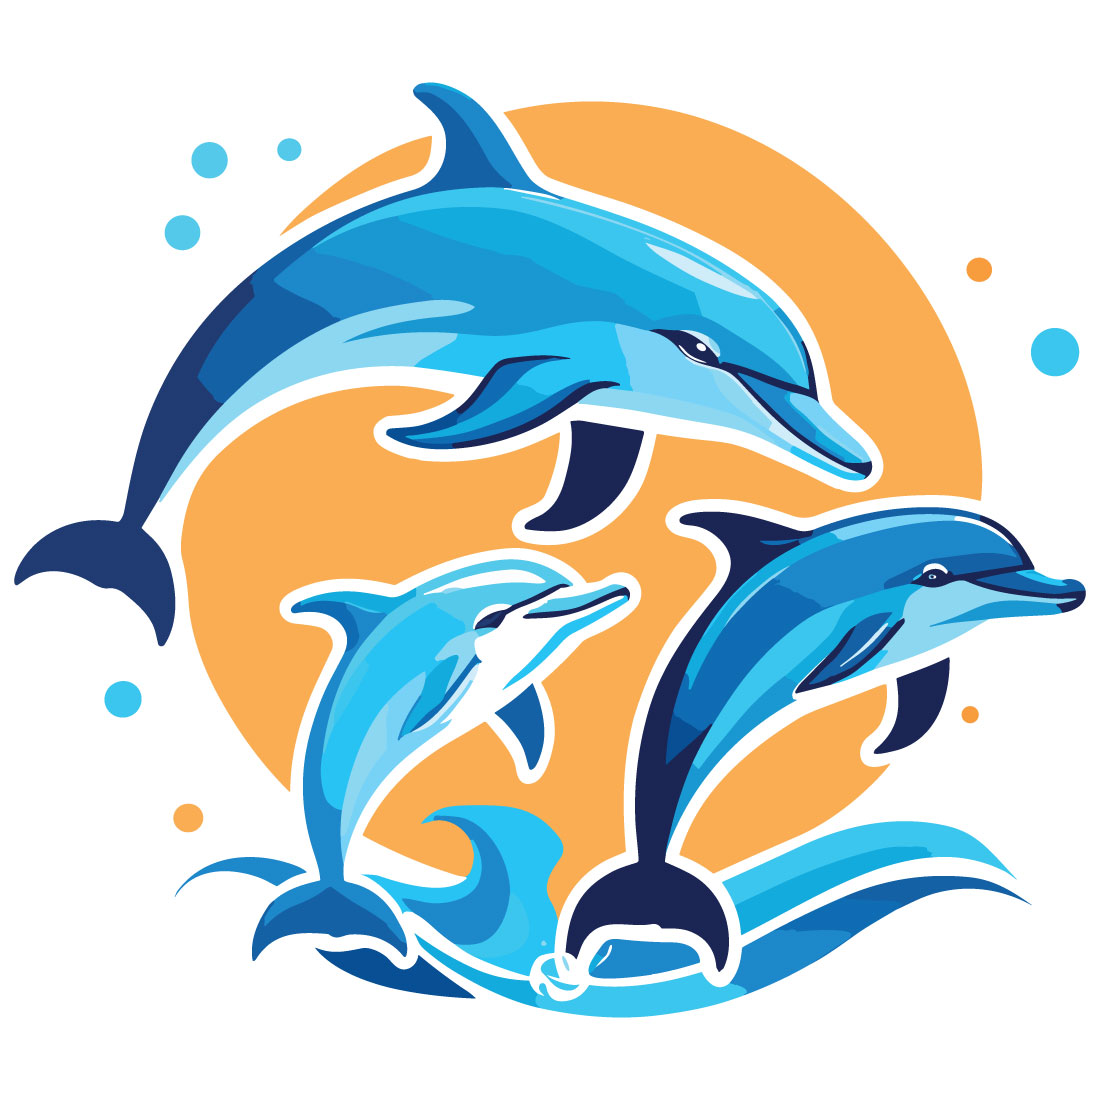 6 Set Bundle Dolphin With Water Splash Logos for 7$ Only cover image.